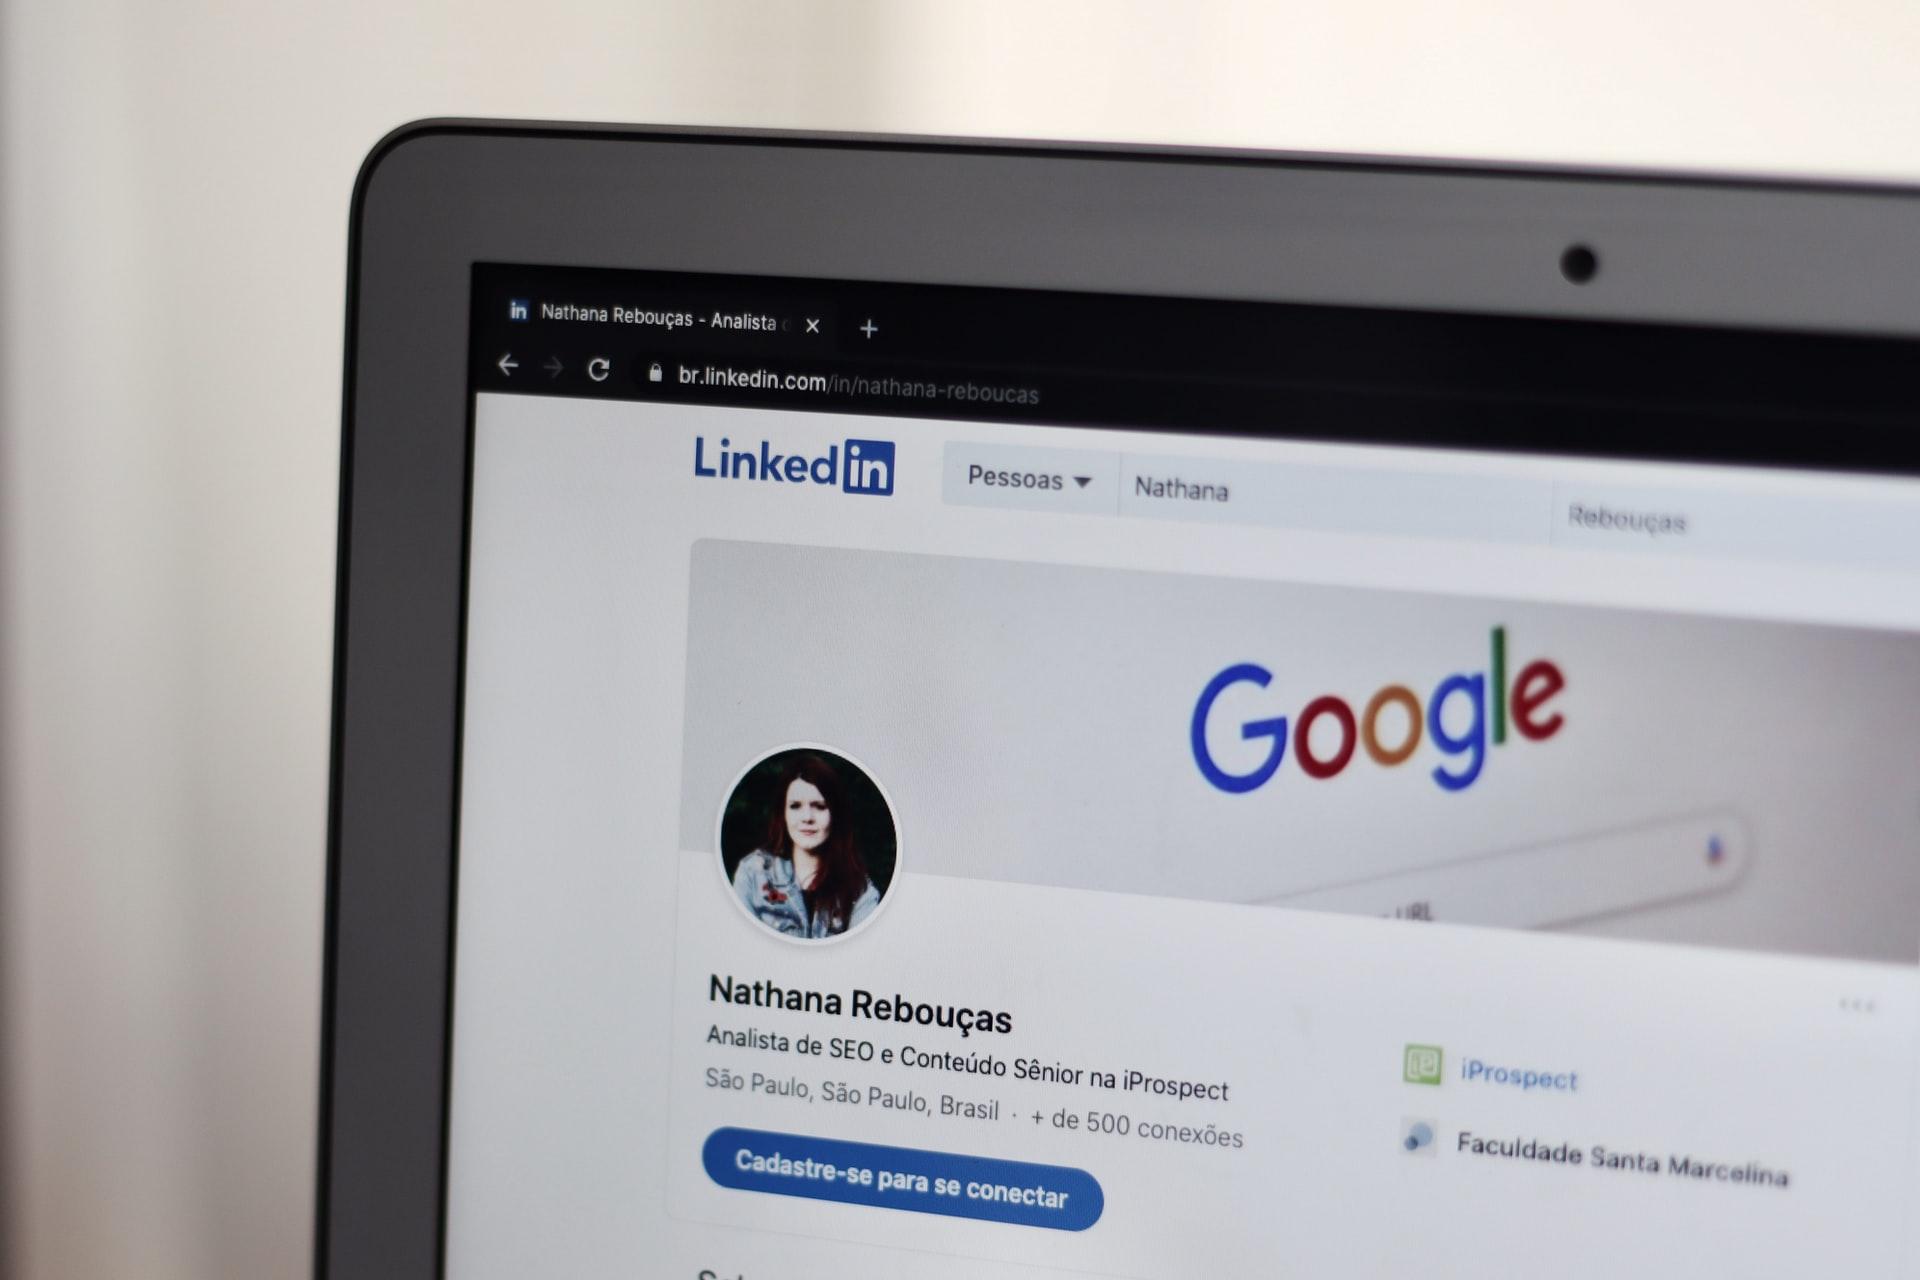 LinkedIn’s unique market positioning opens up new opportunities for brands